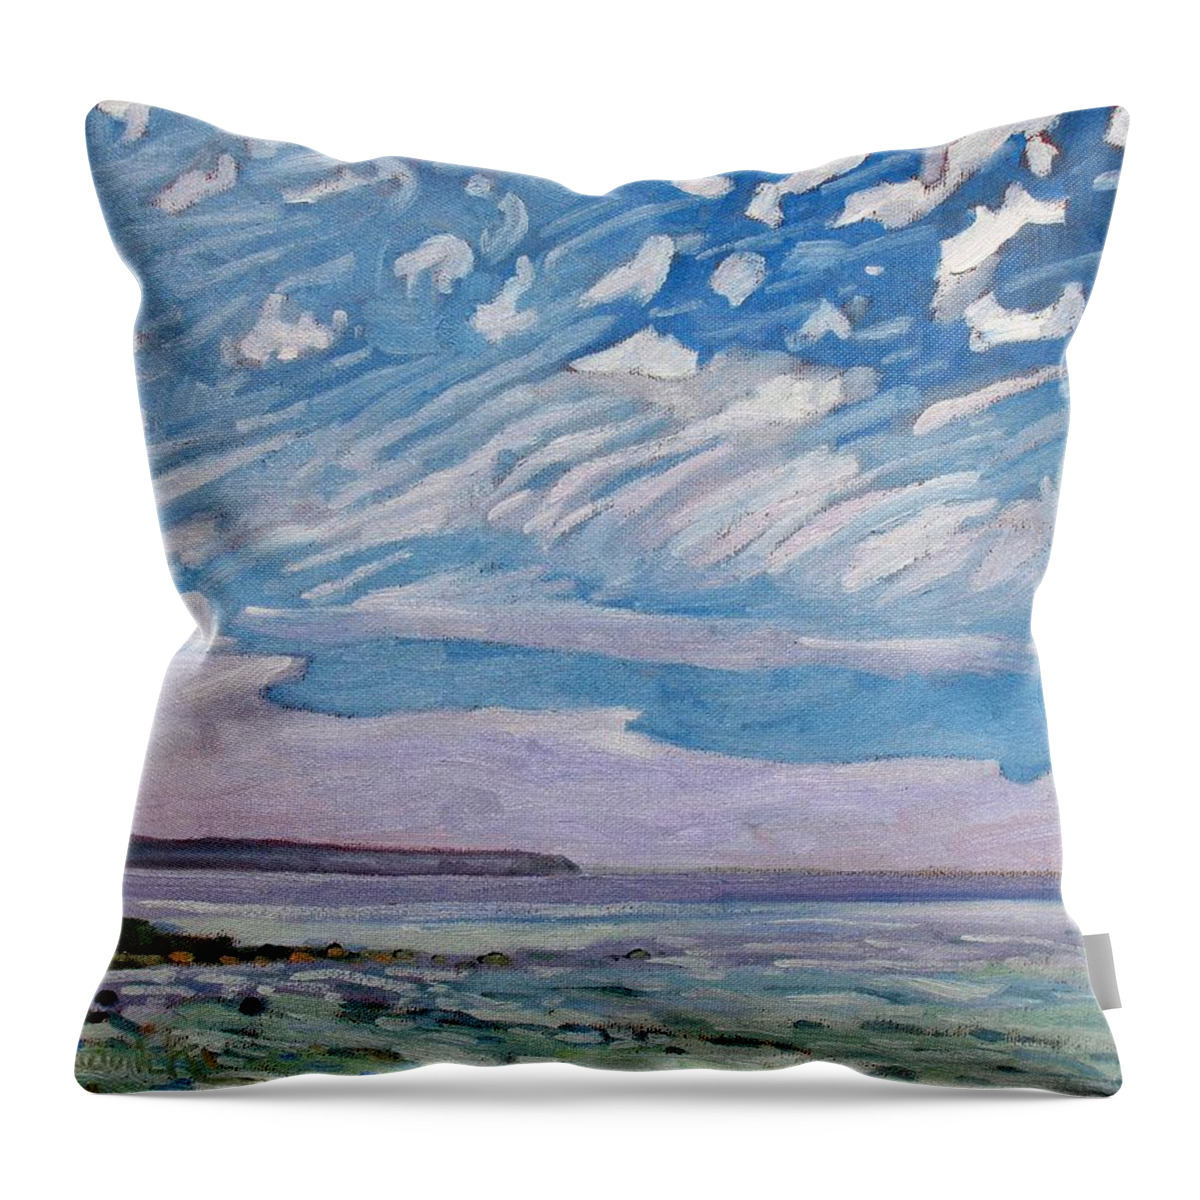 816 Throw Pillow featuring the painting Wimpy Cold Front by Phil Chadwick